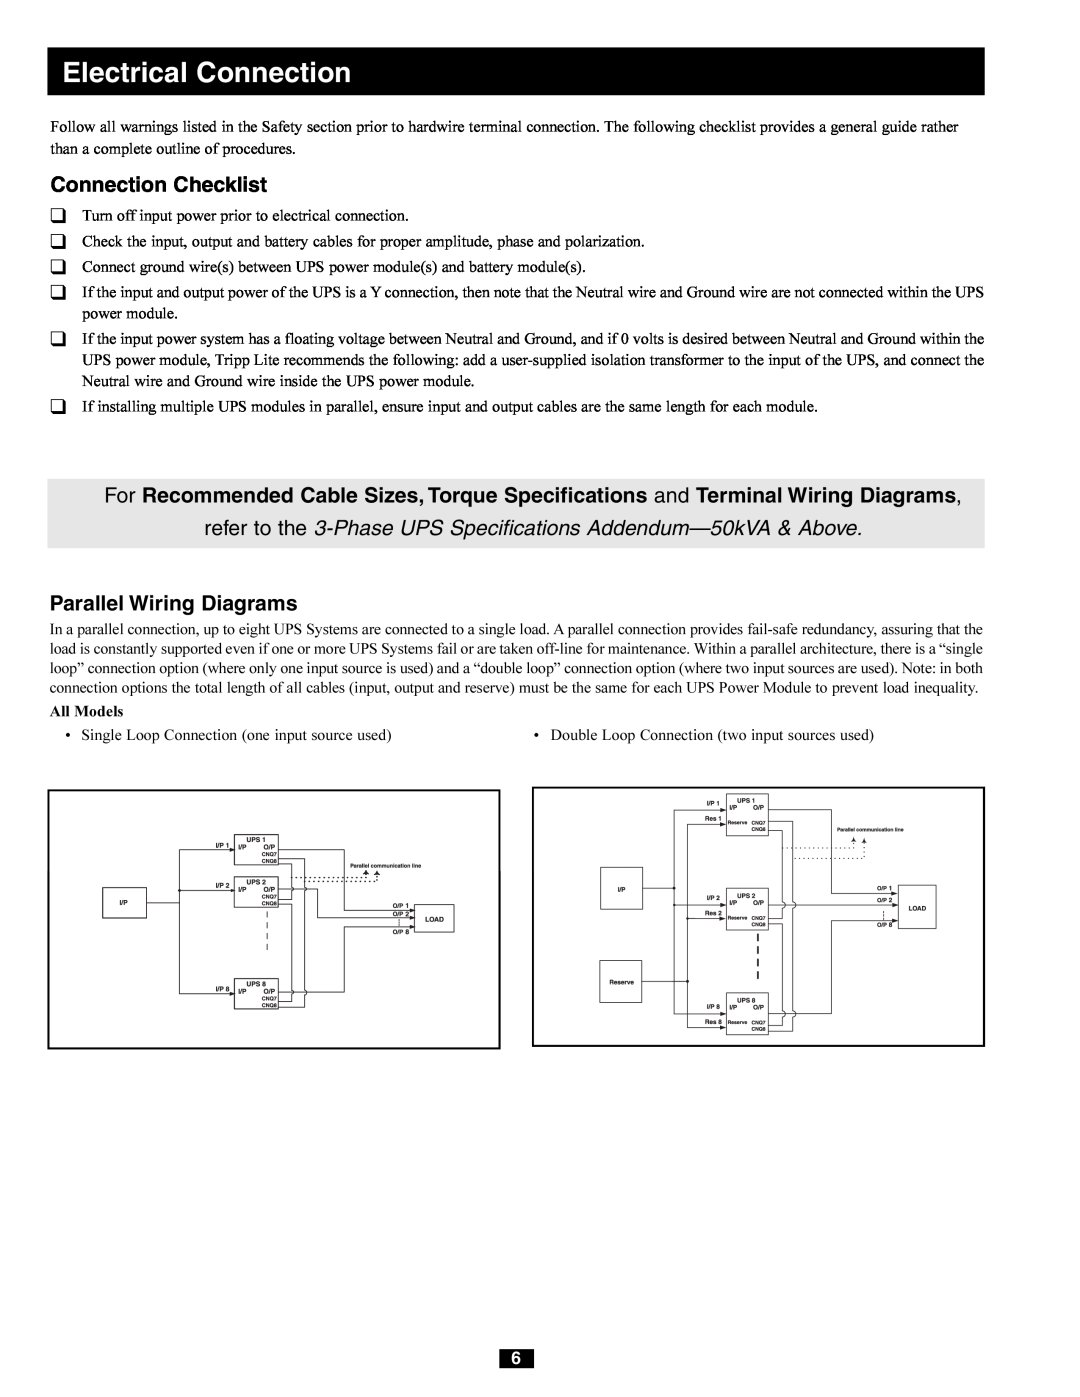 Tripp Lite 277/480V AC, 240/415V AC Connection Checklist, refer to the 3-Phase UPS Specifications Addendum-50kVA & Above 